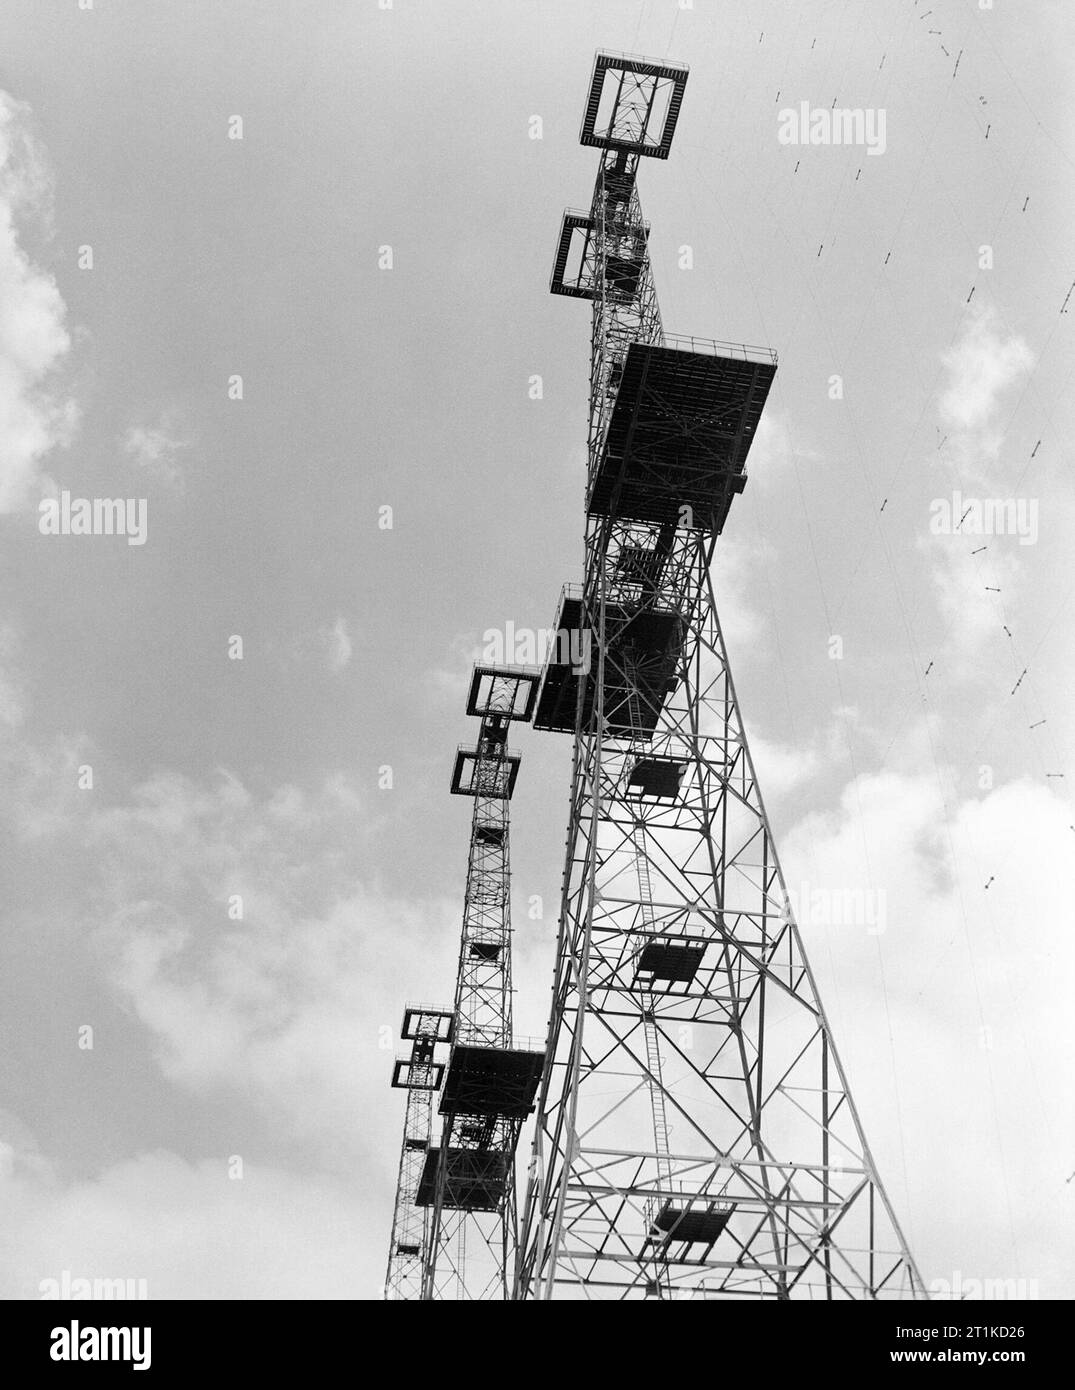 The 360ft transmitter towers at Bawdsey Chain Home radar station, Suffolk, May 1945. Chain Home: AMES Type 1 CH East Coast, 360ft transmitter aerial towers at Bawdsey CH station, Suffolk. Stock Photo